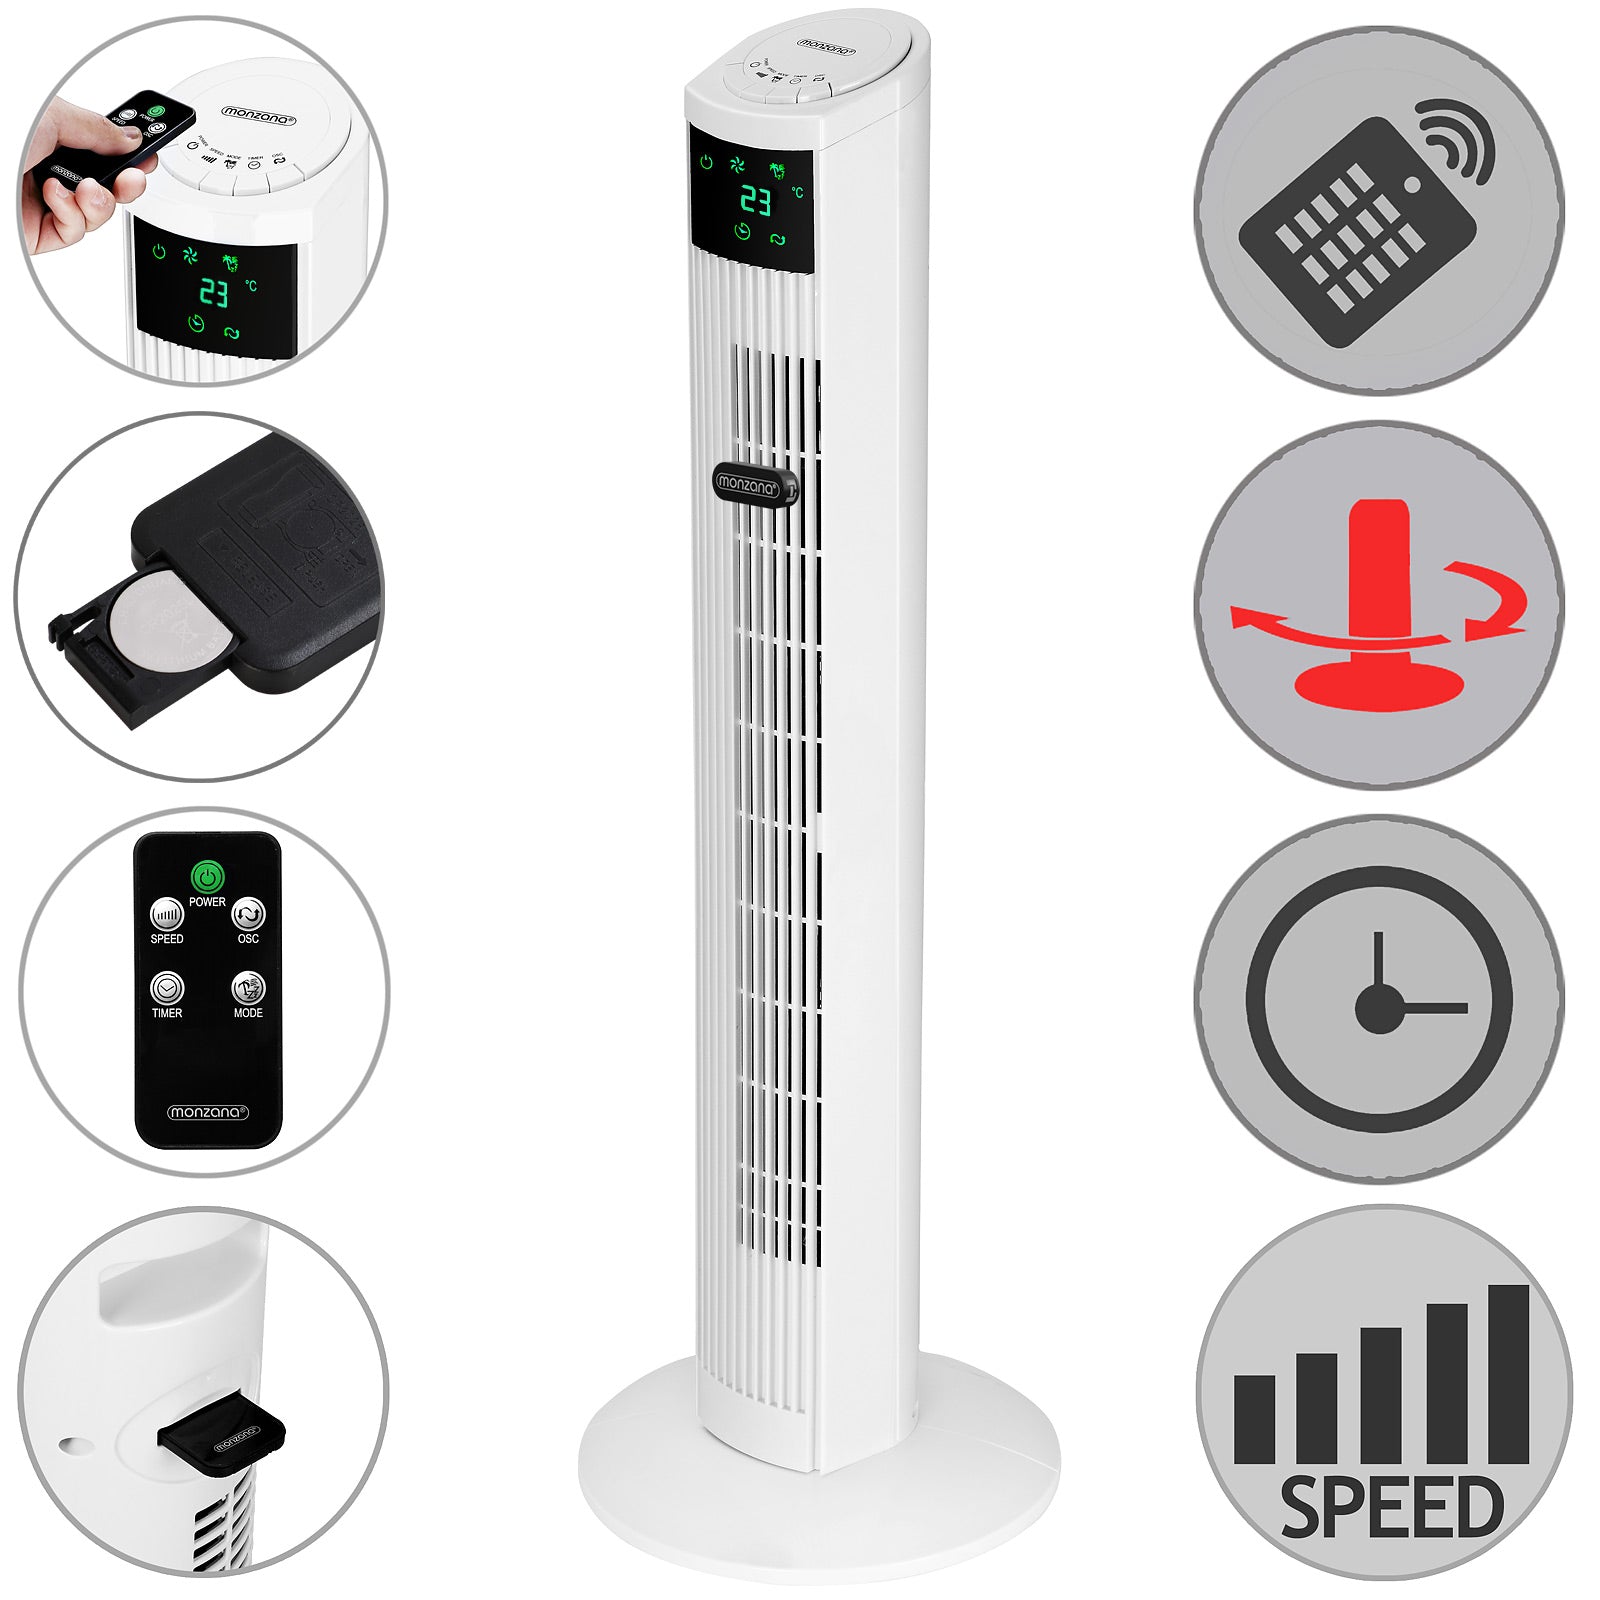 Nancy's River Park Tower Fan - Fan - Incl. Remote control - With display and turbo function - Fans - 32 x 96 x 32 cm